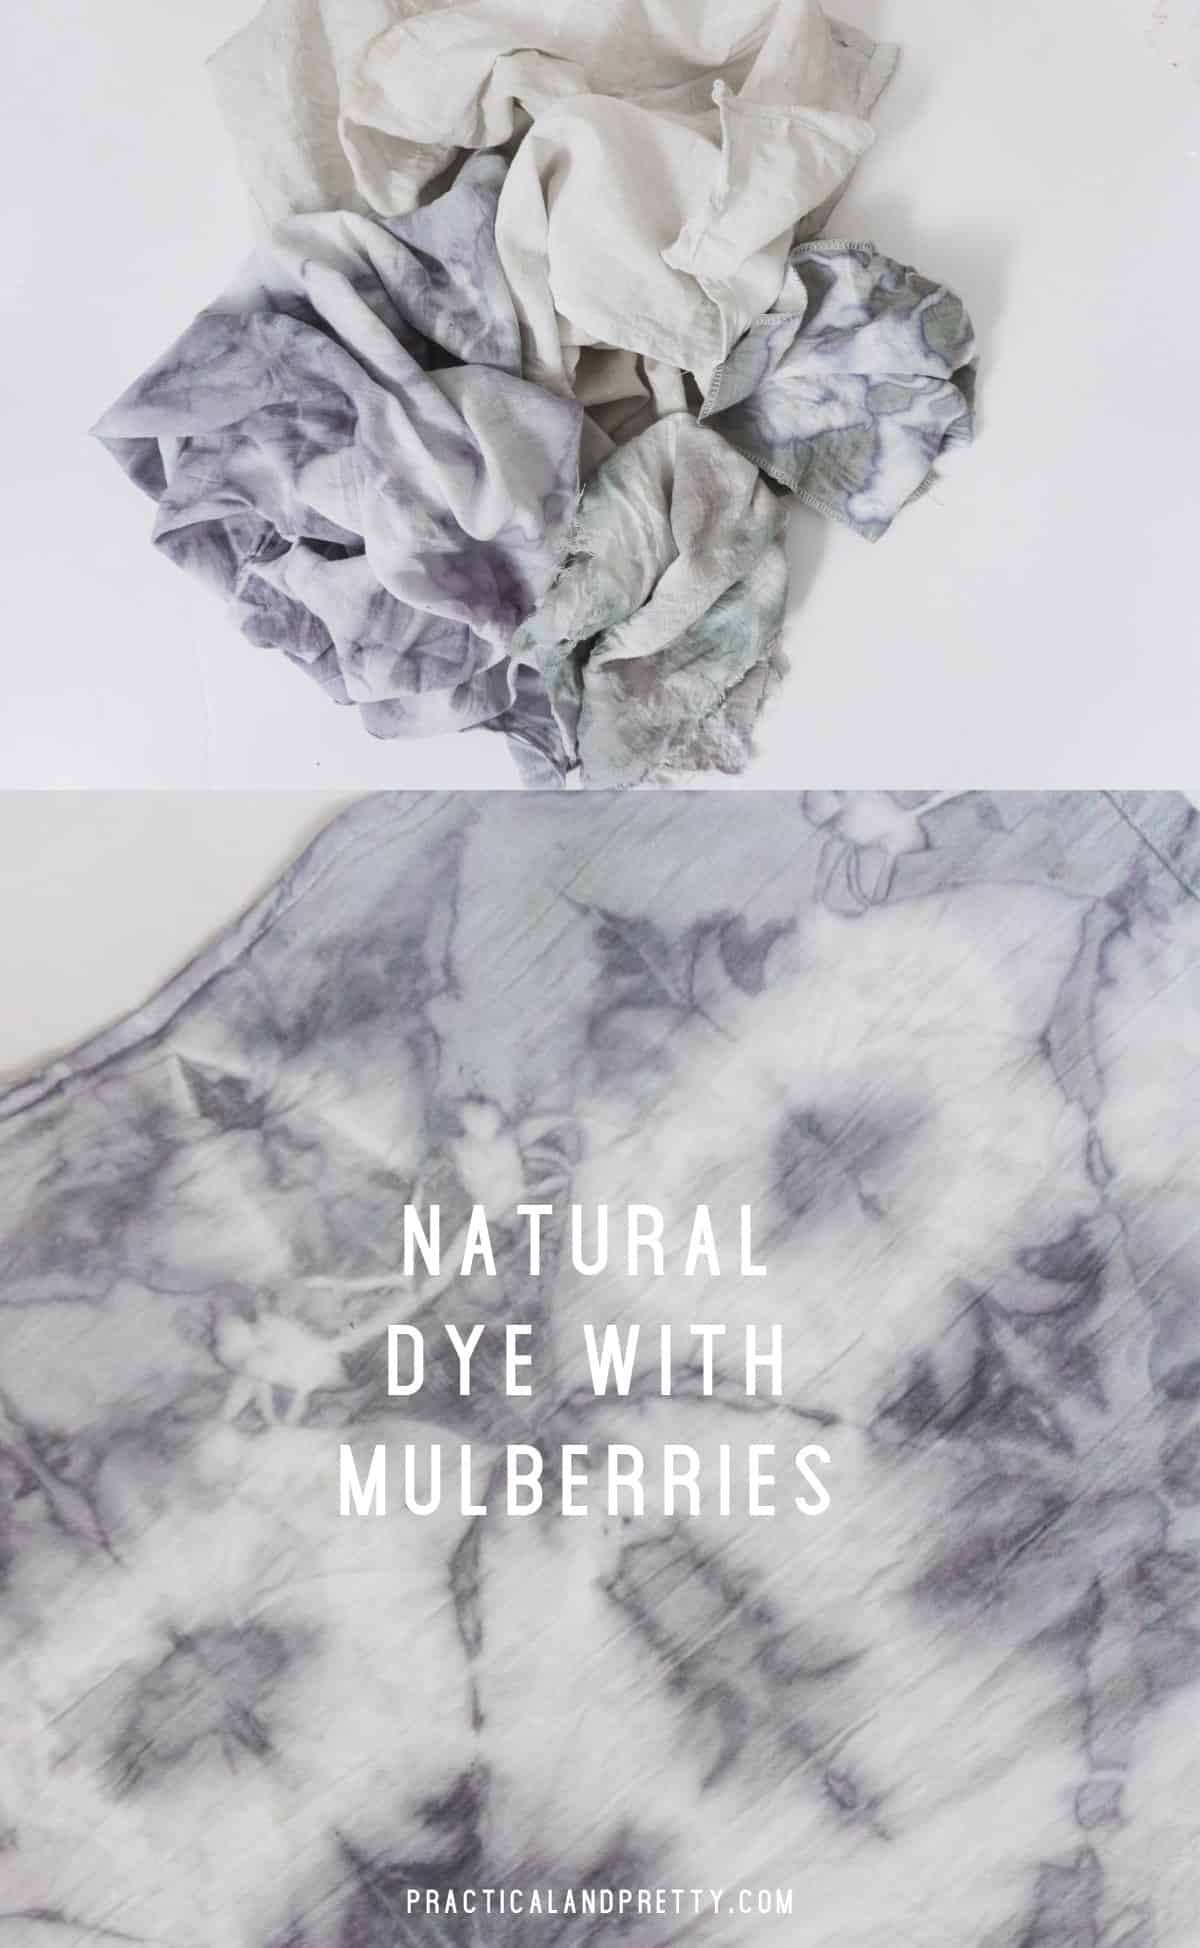 If your mulberry bush is producing more berries than you can eat why not try dyeing with them? This gorgeous purple color will look great on natural fabric.